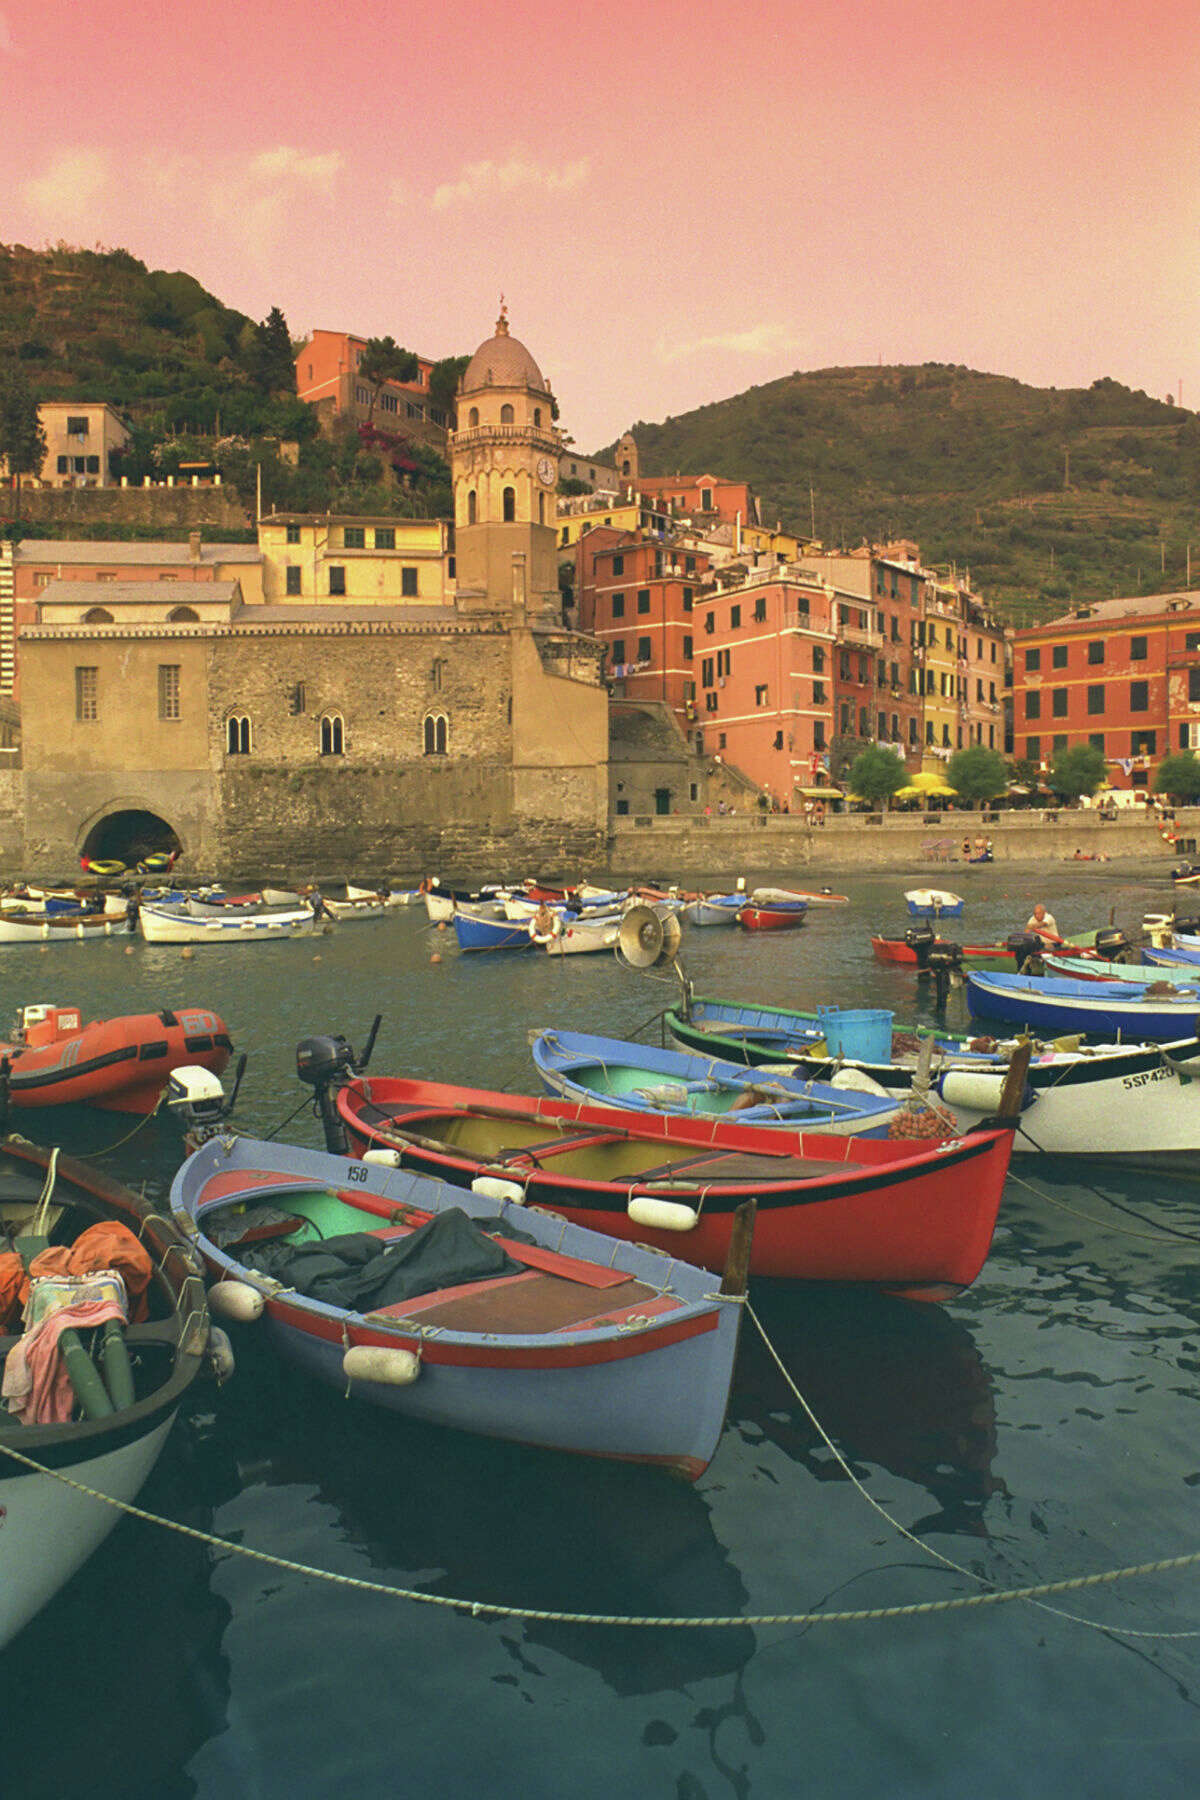 Sunrise heightens the charm of Italy's seaside villages ? such as Vernazza in the Cinque Terre.